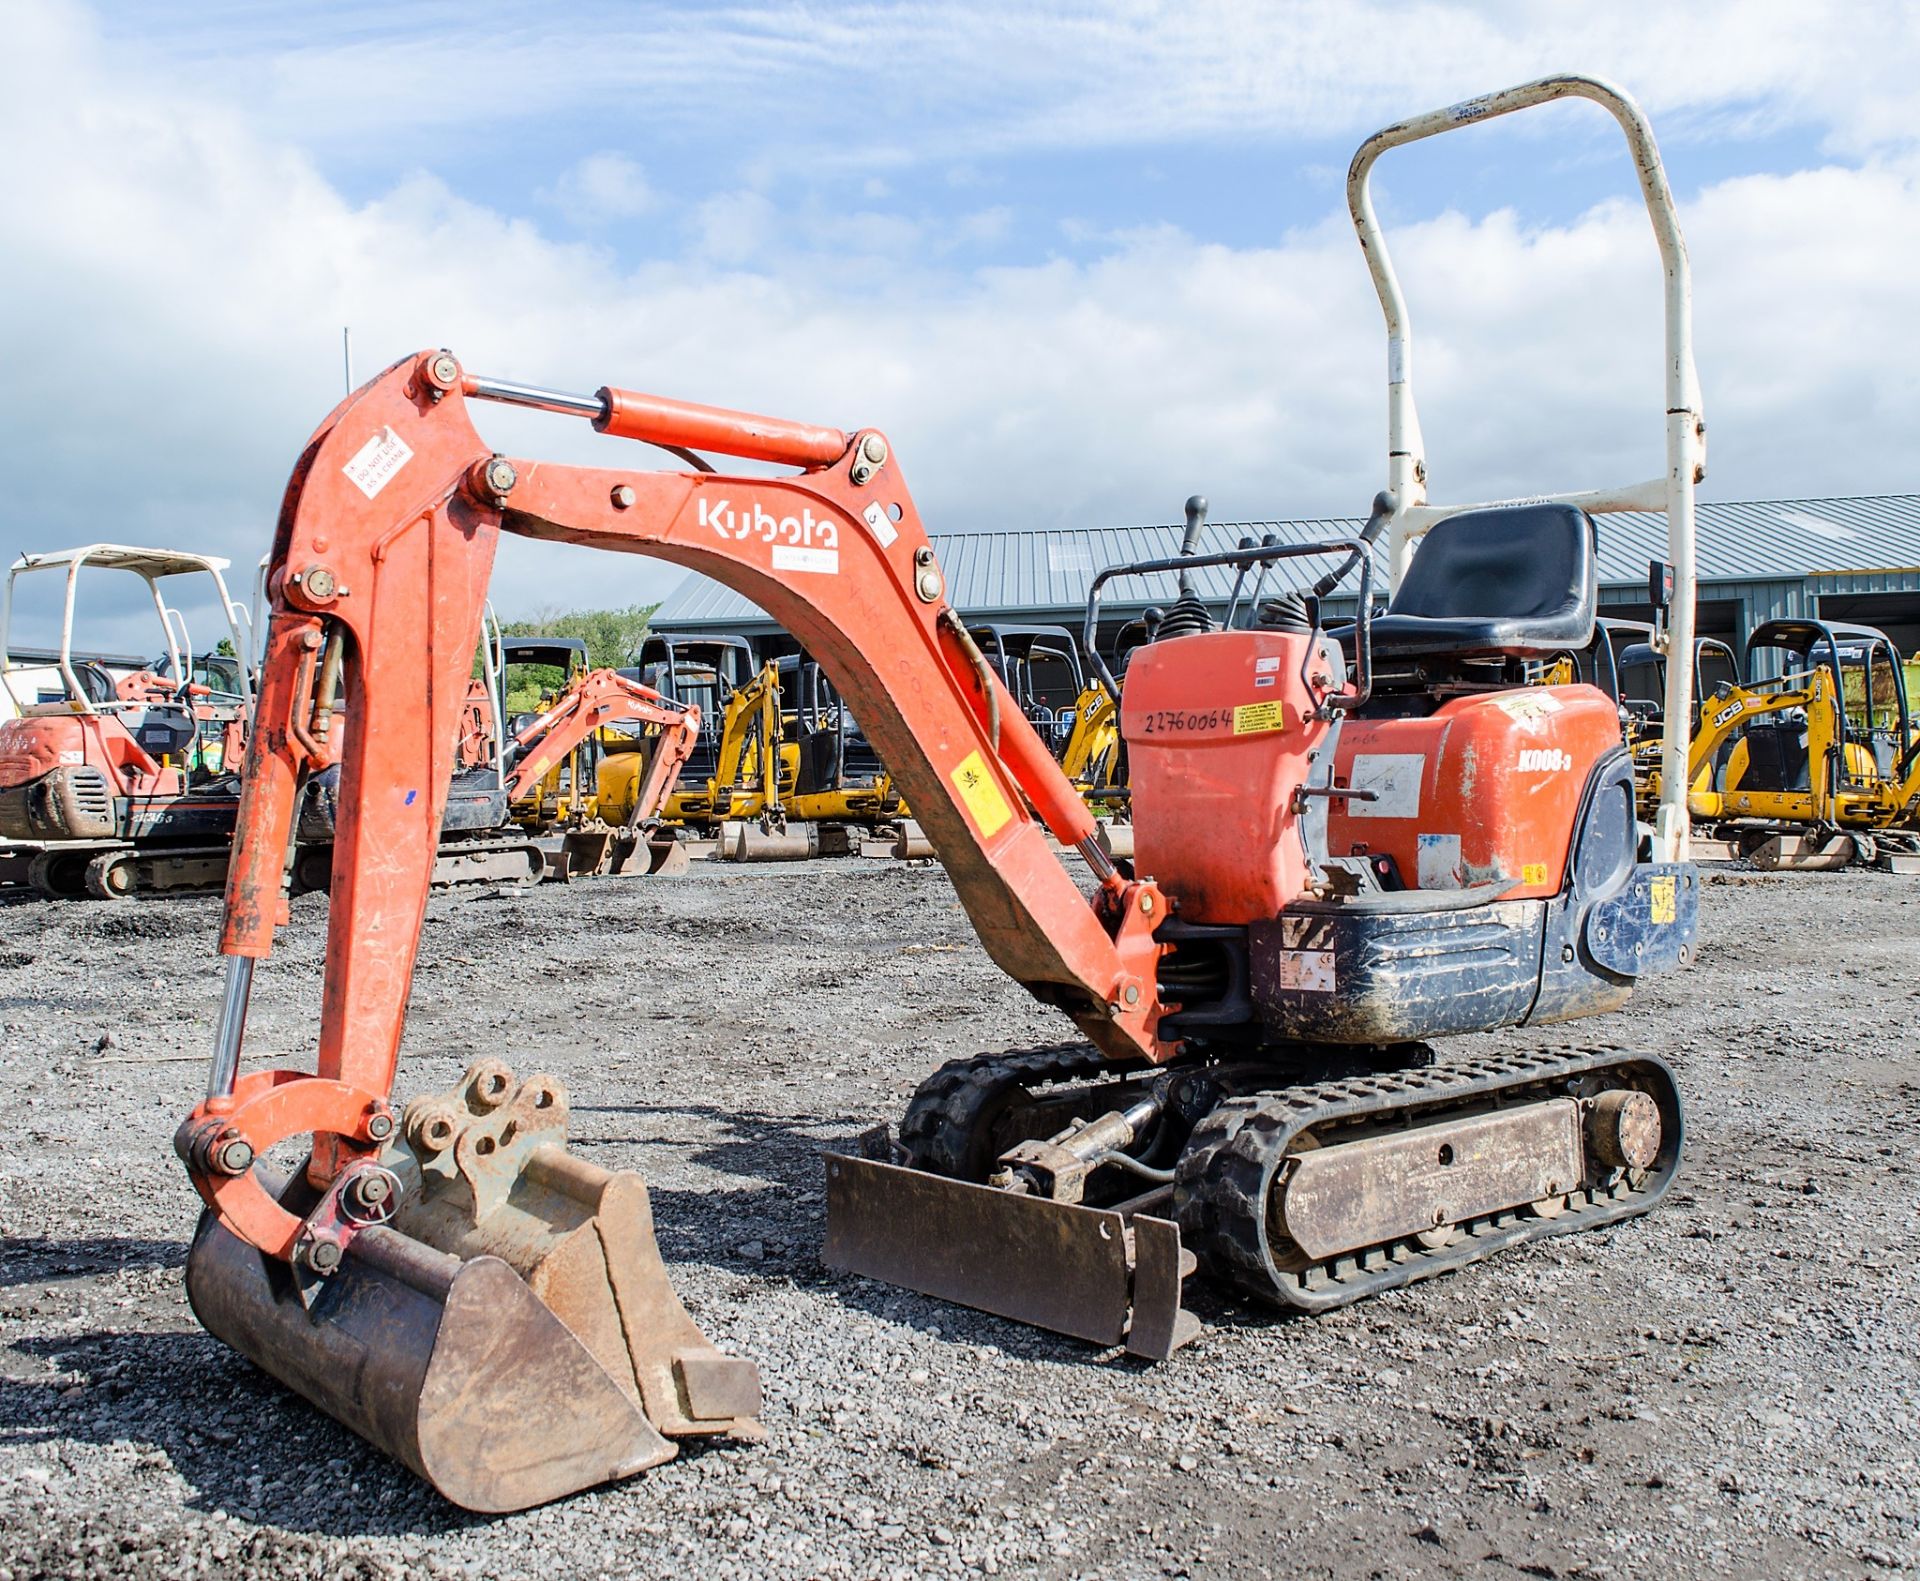 Kubota K008-3 0.8 tonne rubber tracked micro excavator Year: 2007 S/N: 17838 Recorded Hours: 2350